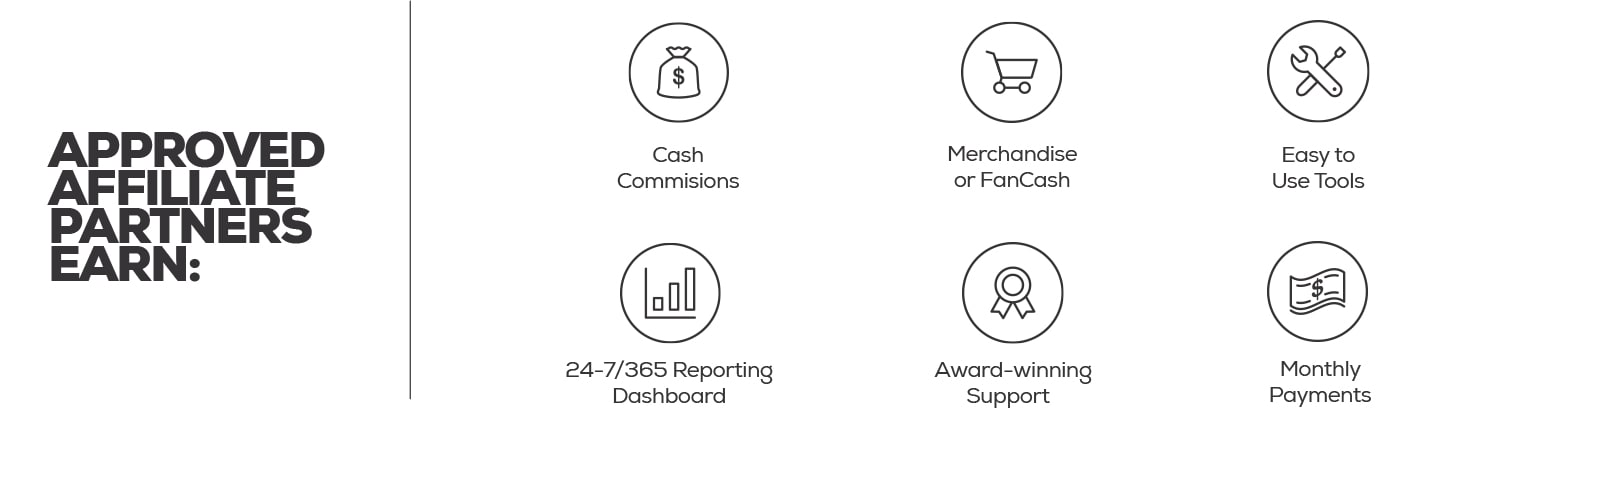 Approved Affiliate Partners Earn: Cash Commisions, Merchandise or FanCash, 24-7/365 Reporting dashboard, award-winning support, easy to use tools, and monthly payments.